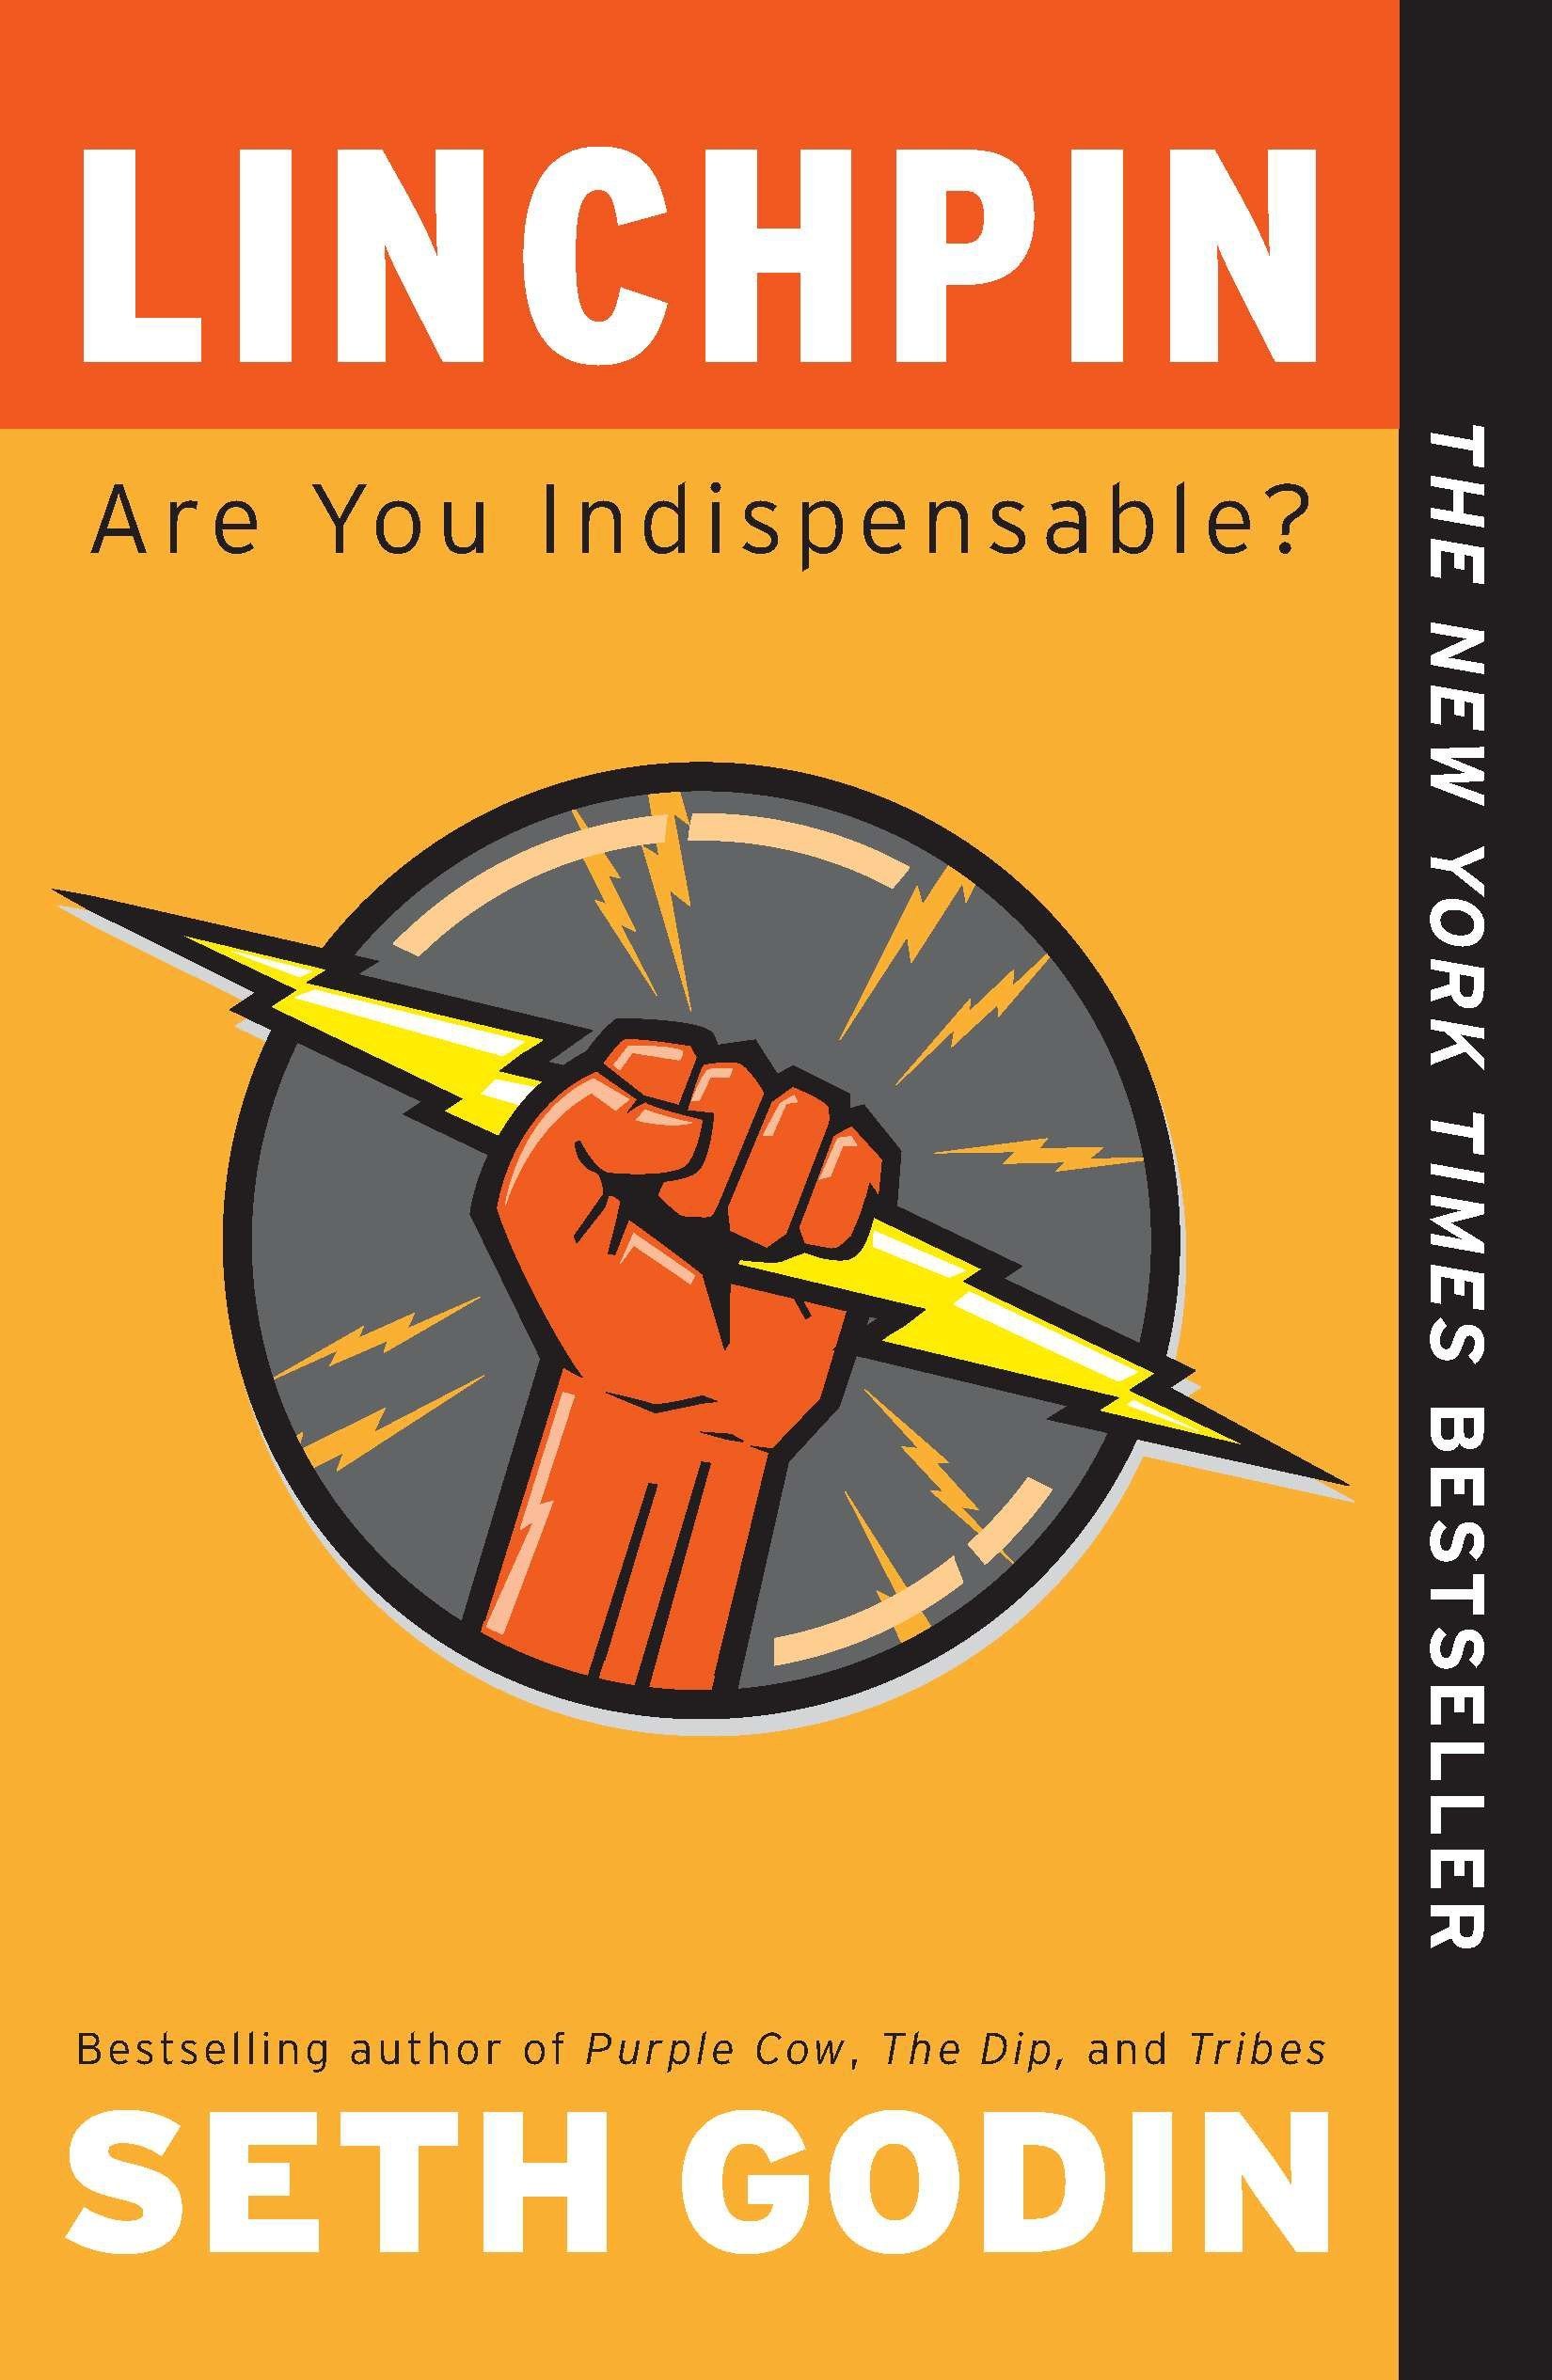 Linchpin: ¿Eres indispensables?